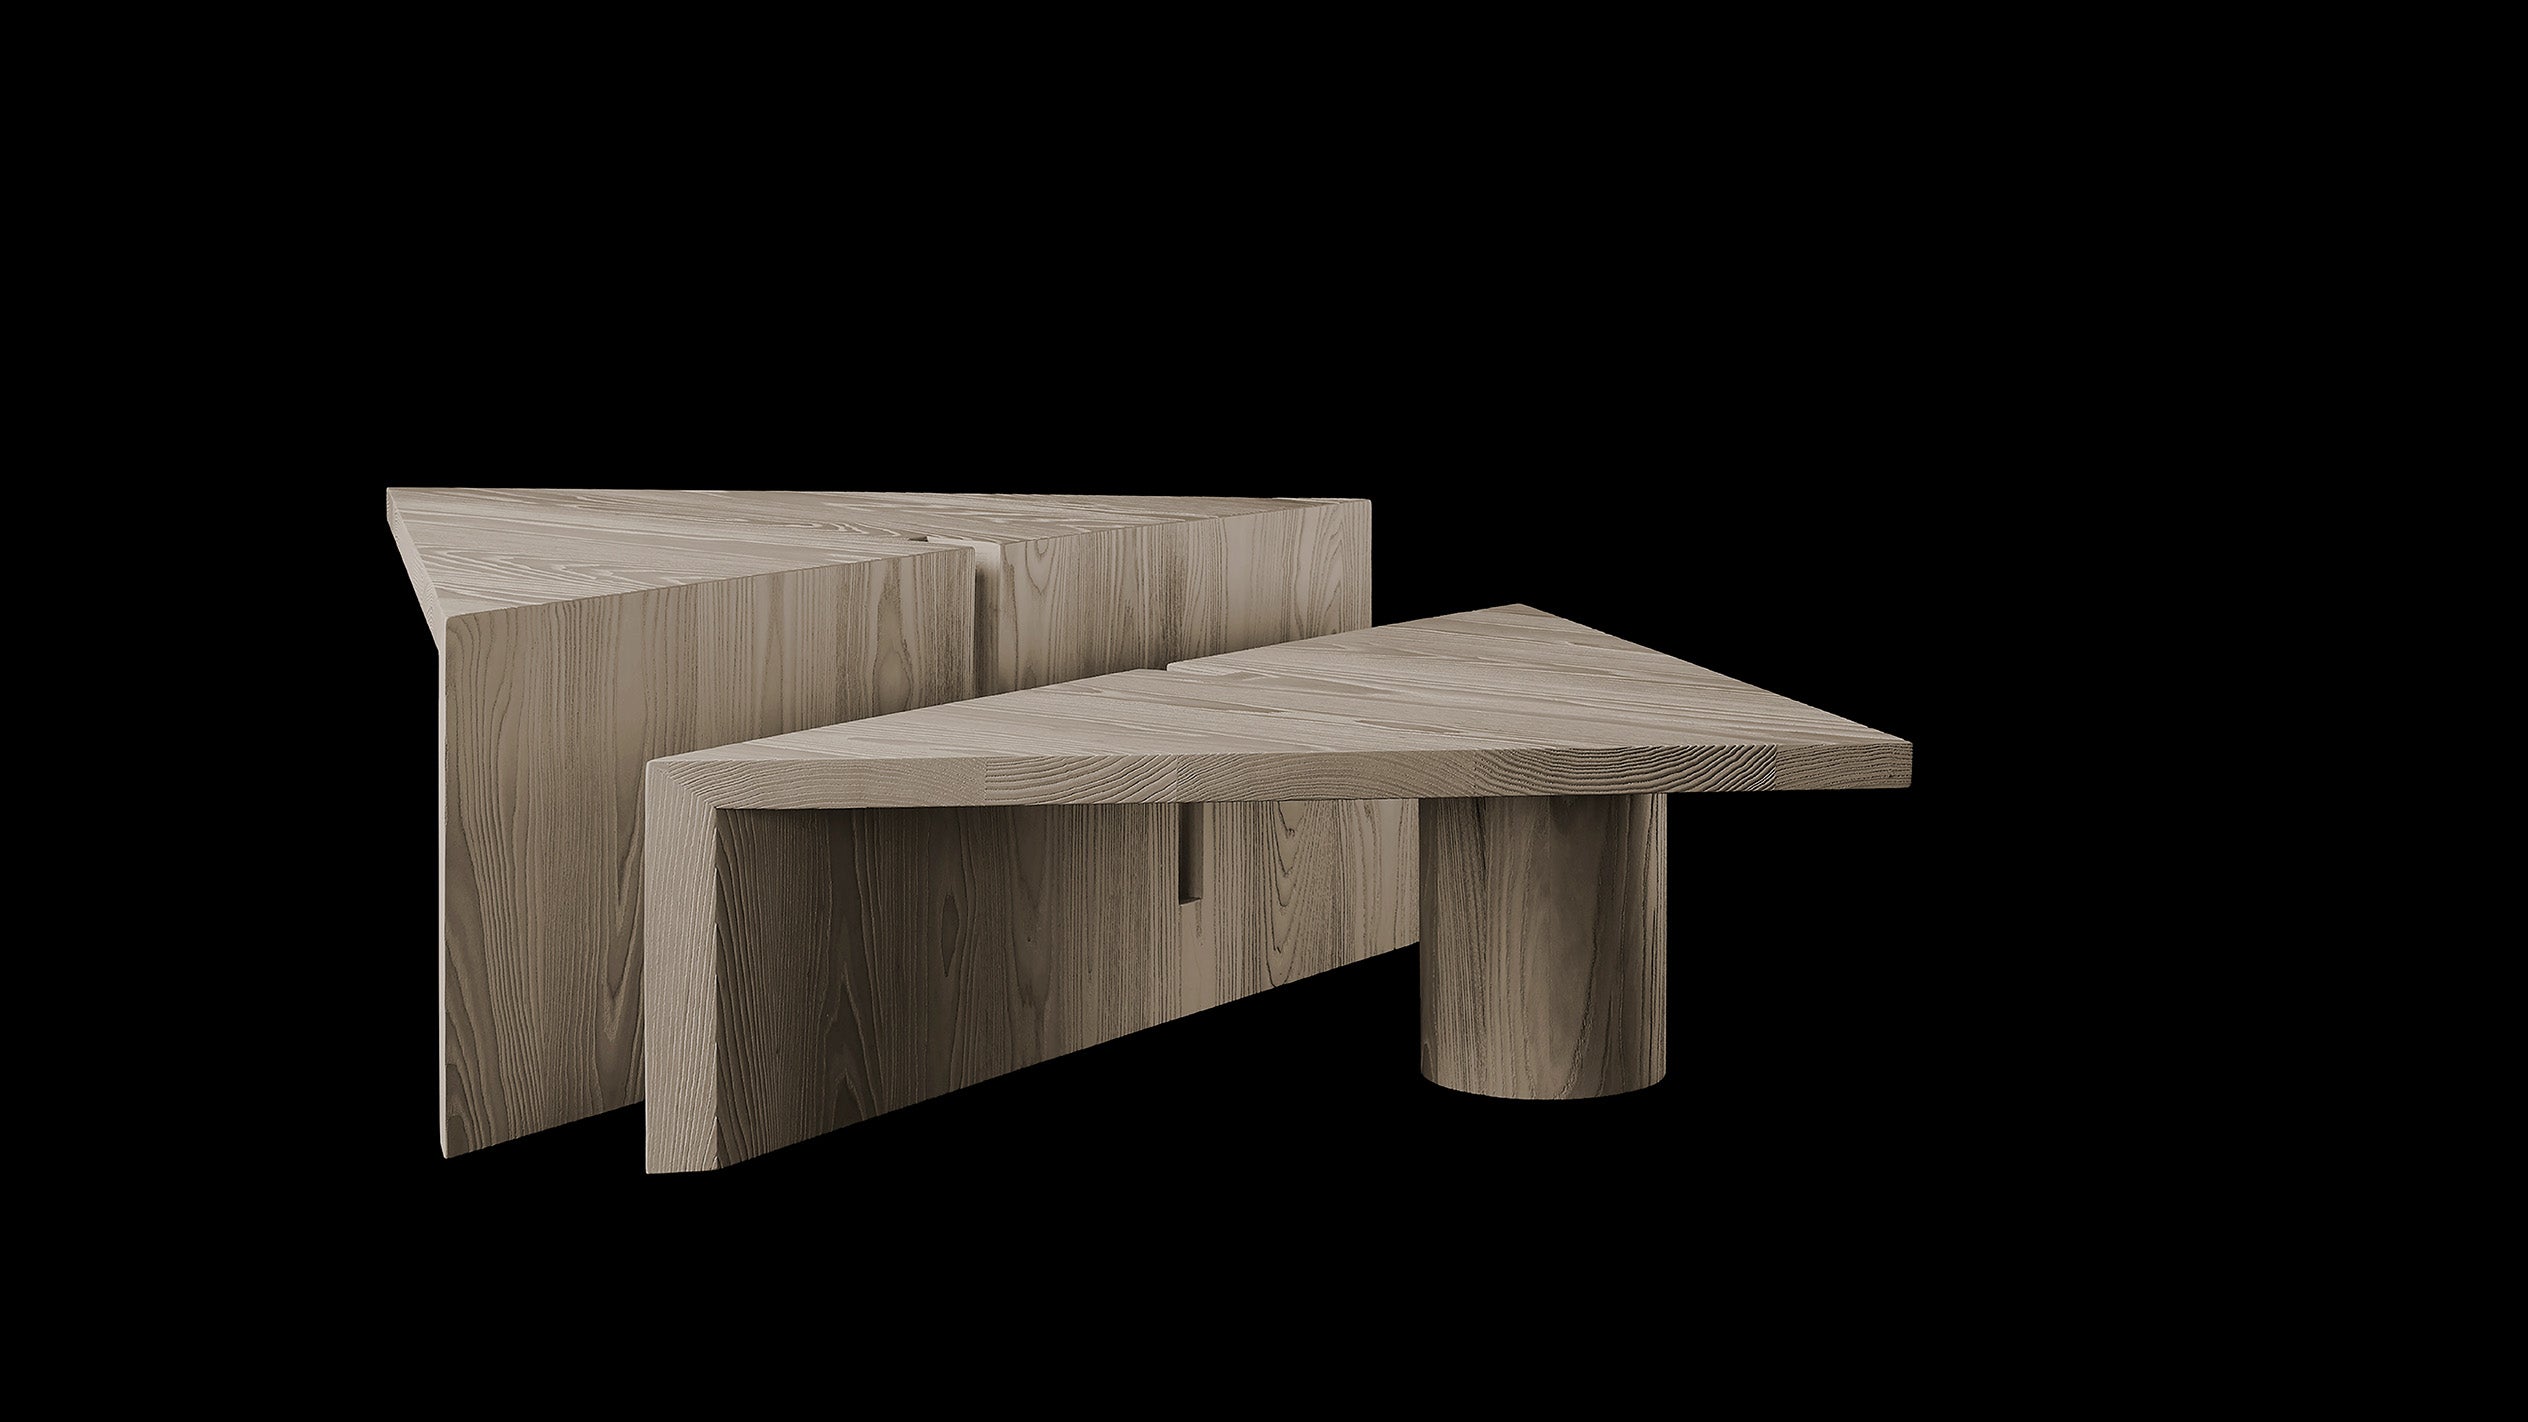 Modular PORTAL coffee table in Bleached Ash Wood against a black background. 